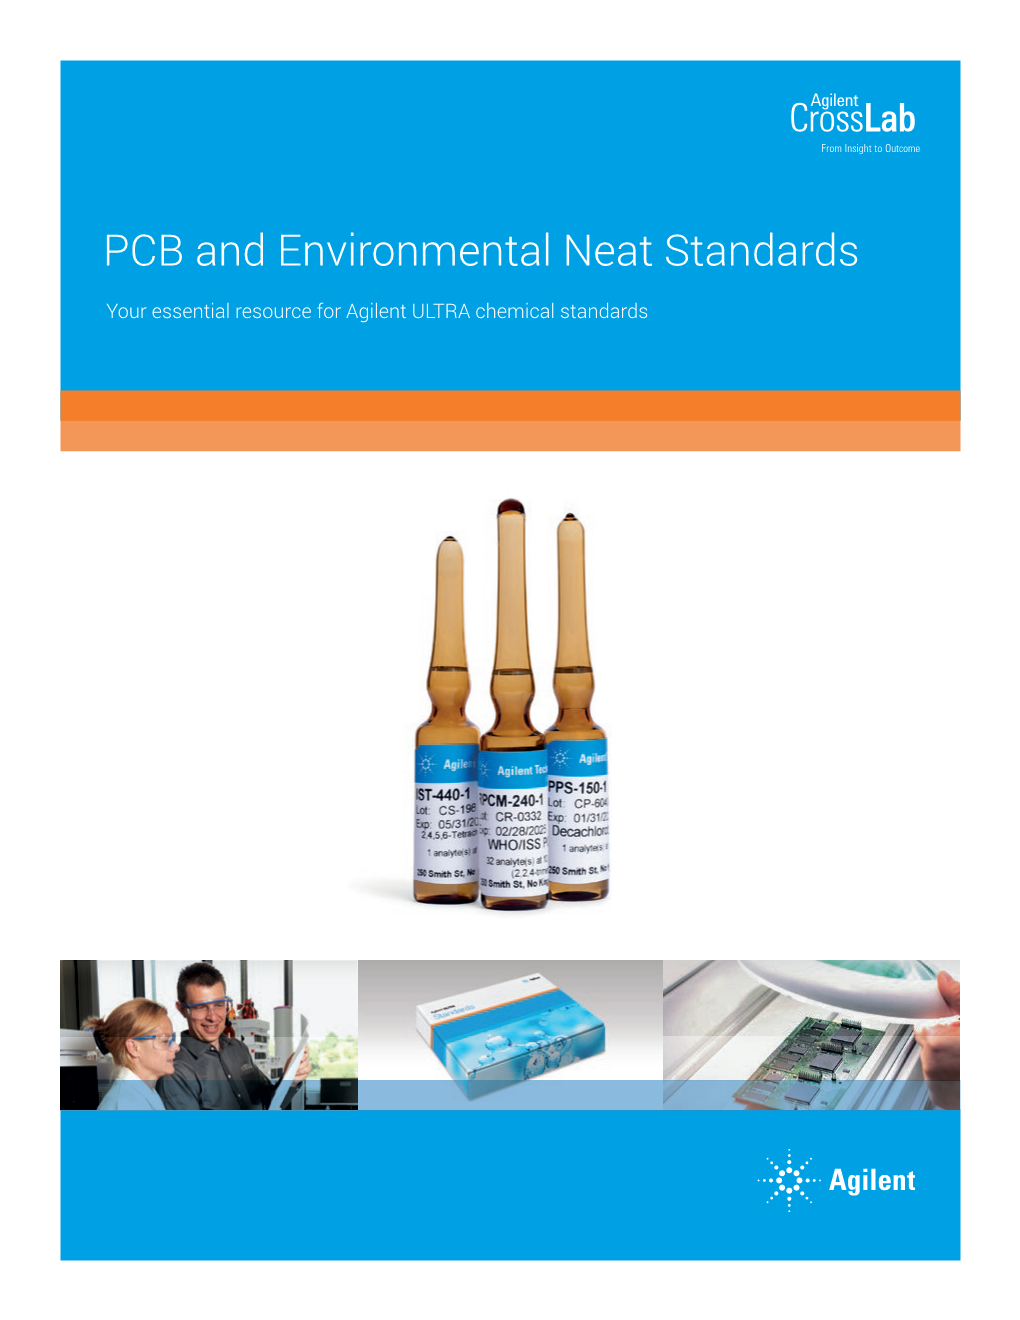 PCB and Environmental Neat Standards